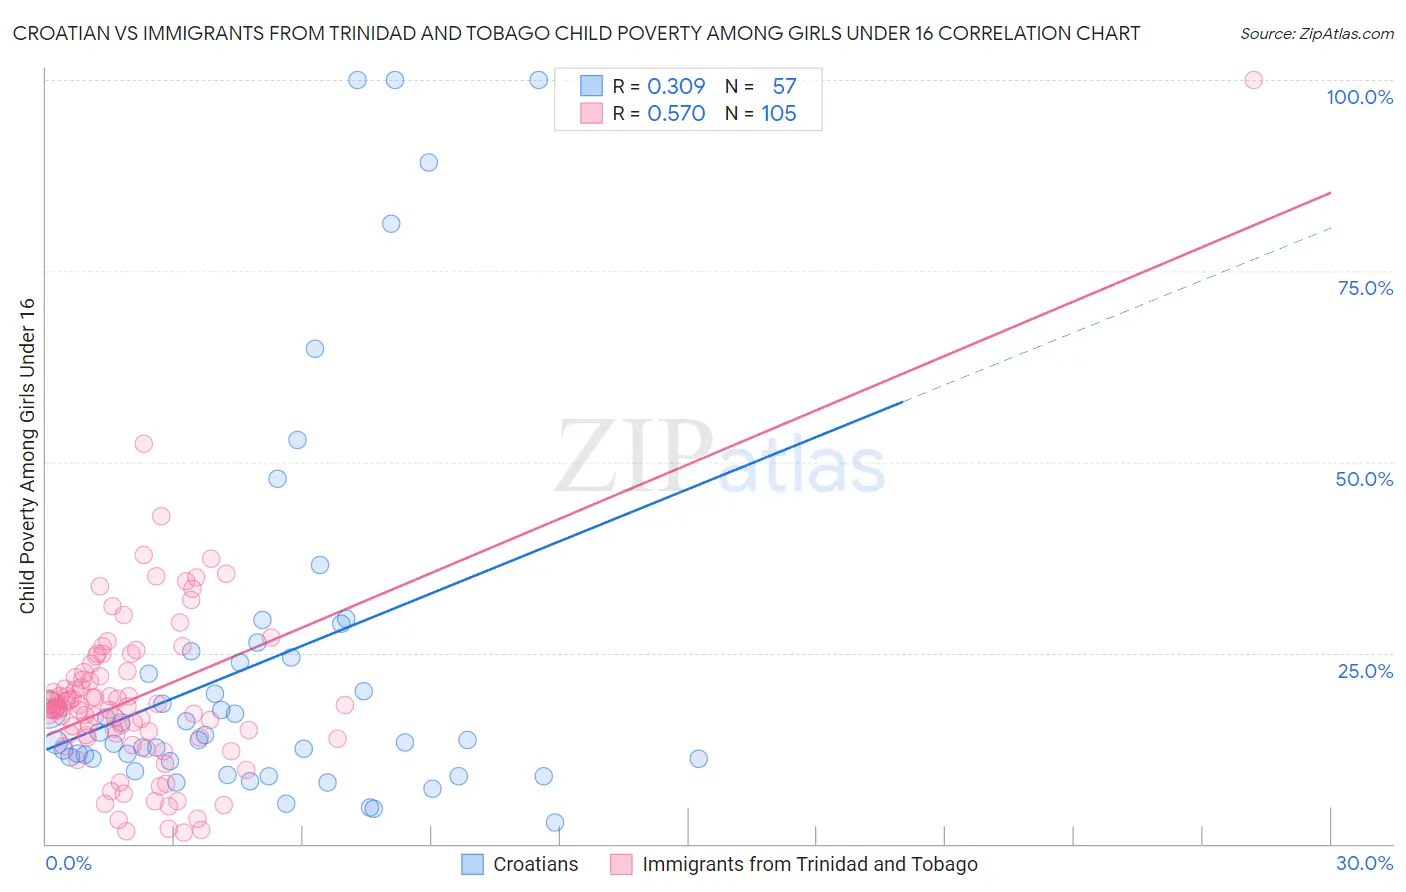 Croatian vs Immigrants from Trinidad and Tobago Child Poverty Among Girls Under 16